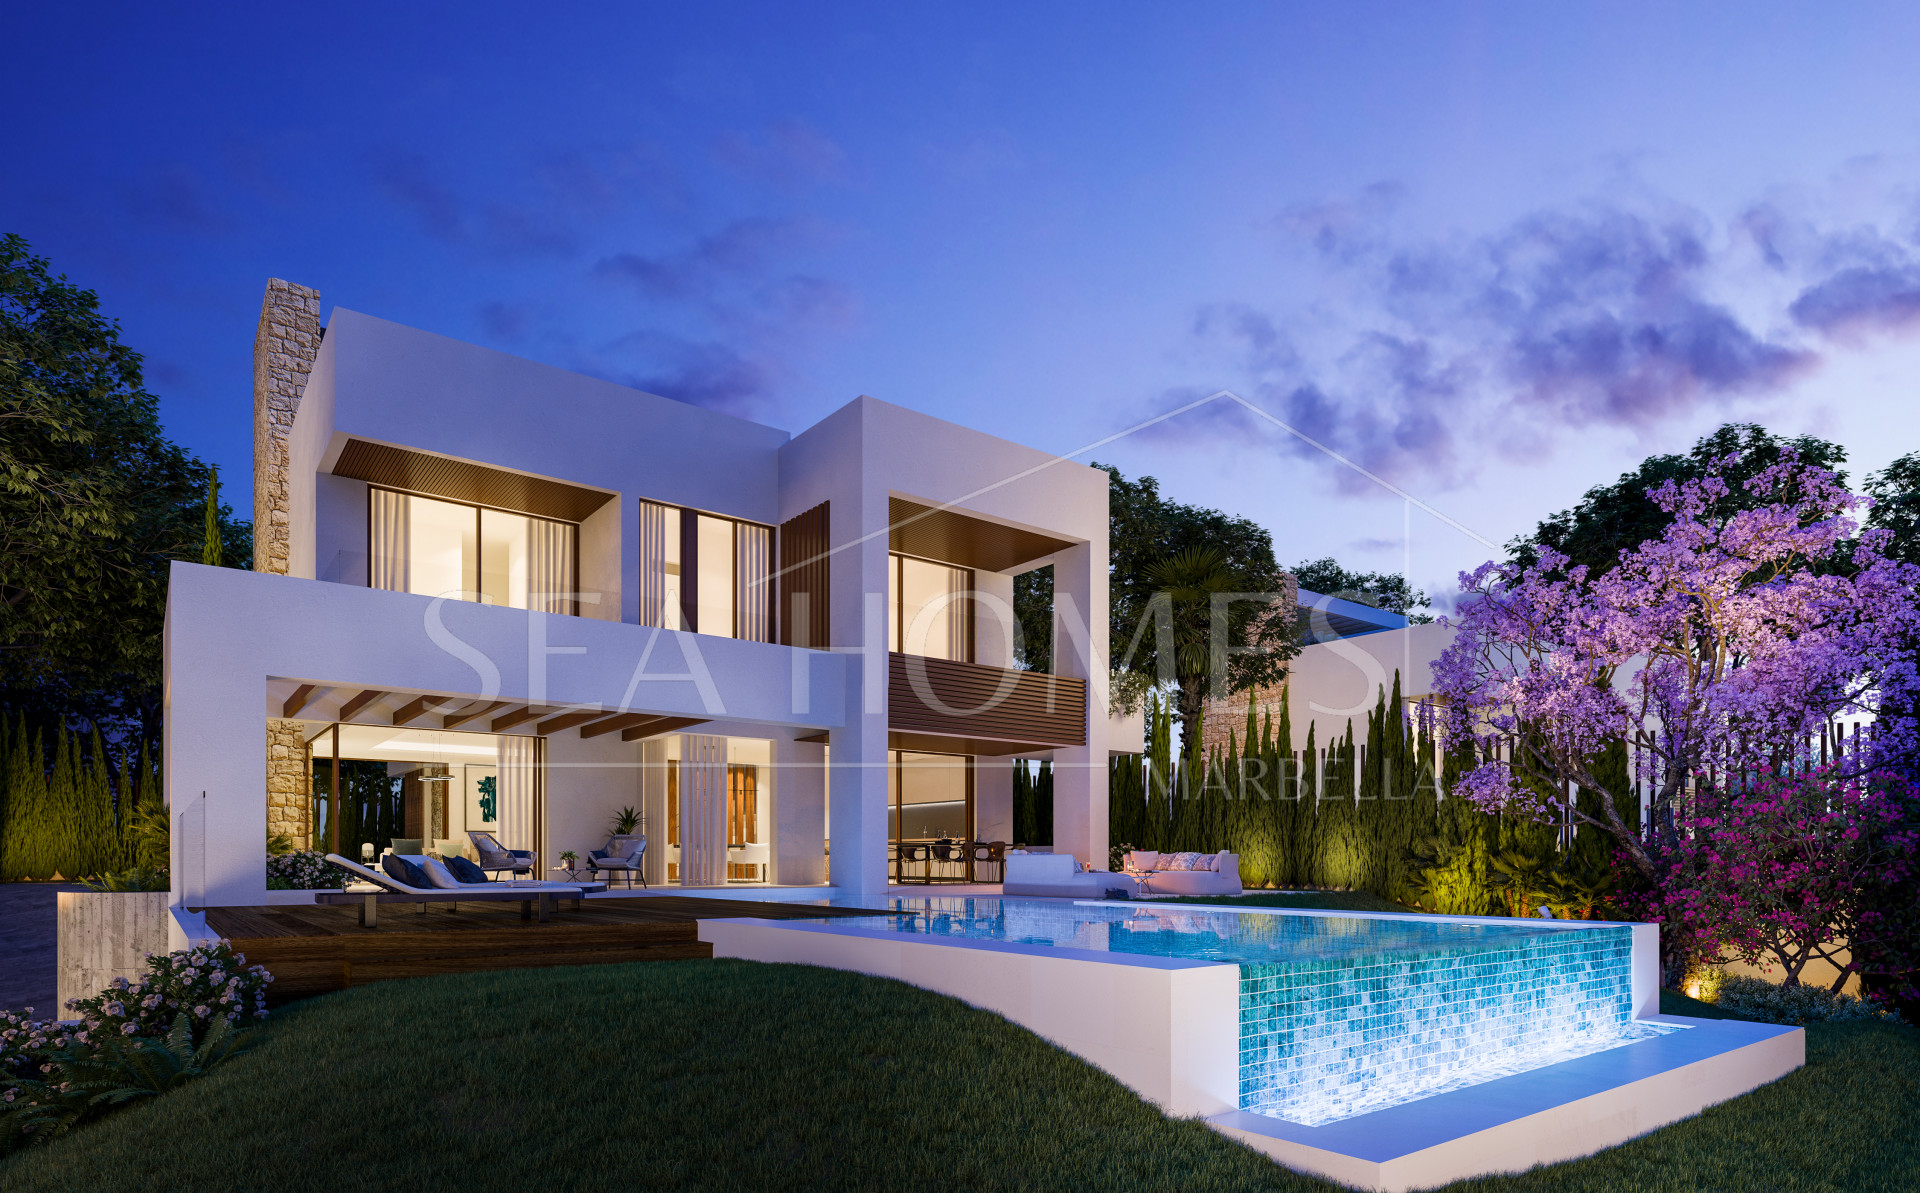 Modern four bedroom, south east facing villa of exceptional qualities is located in a gated community, consisting of only 15 villas, with 24 hour security guards and concierge services situated in a green oasis on the edge of the famous Golden Mile